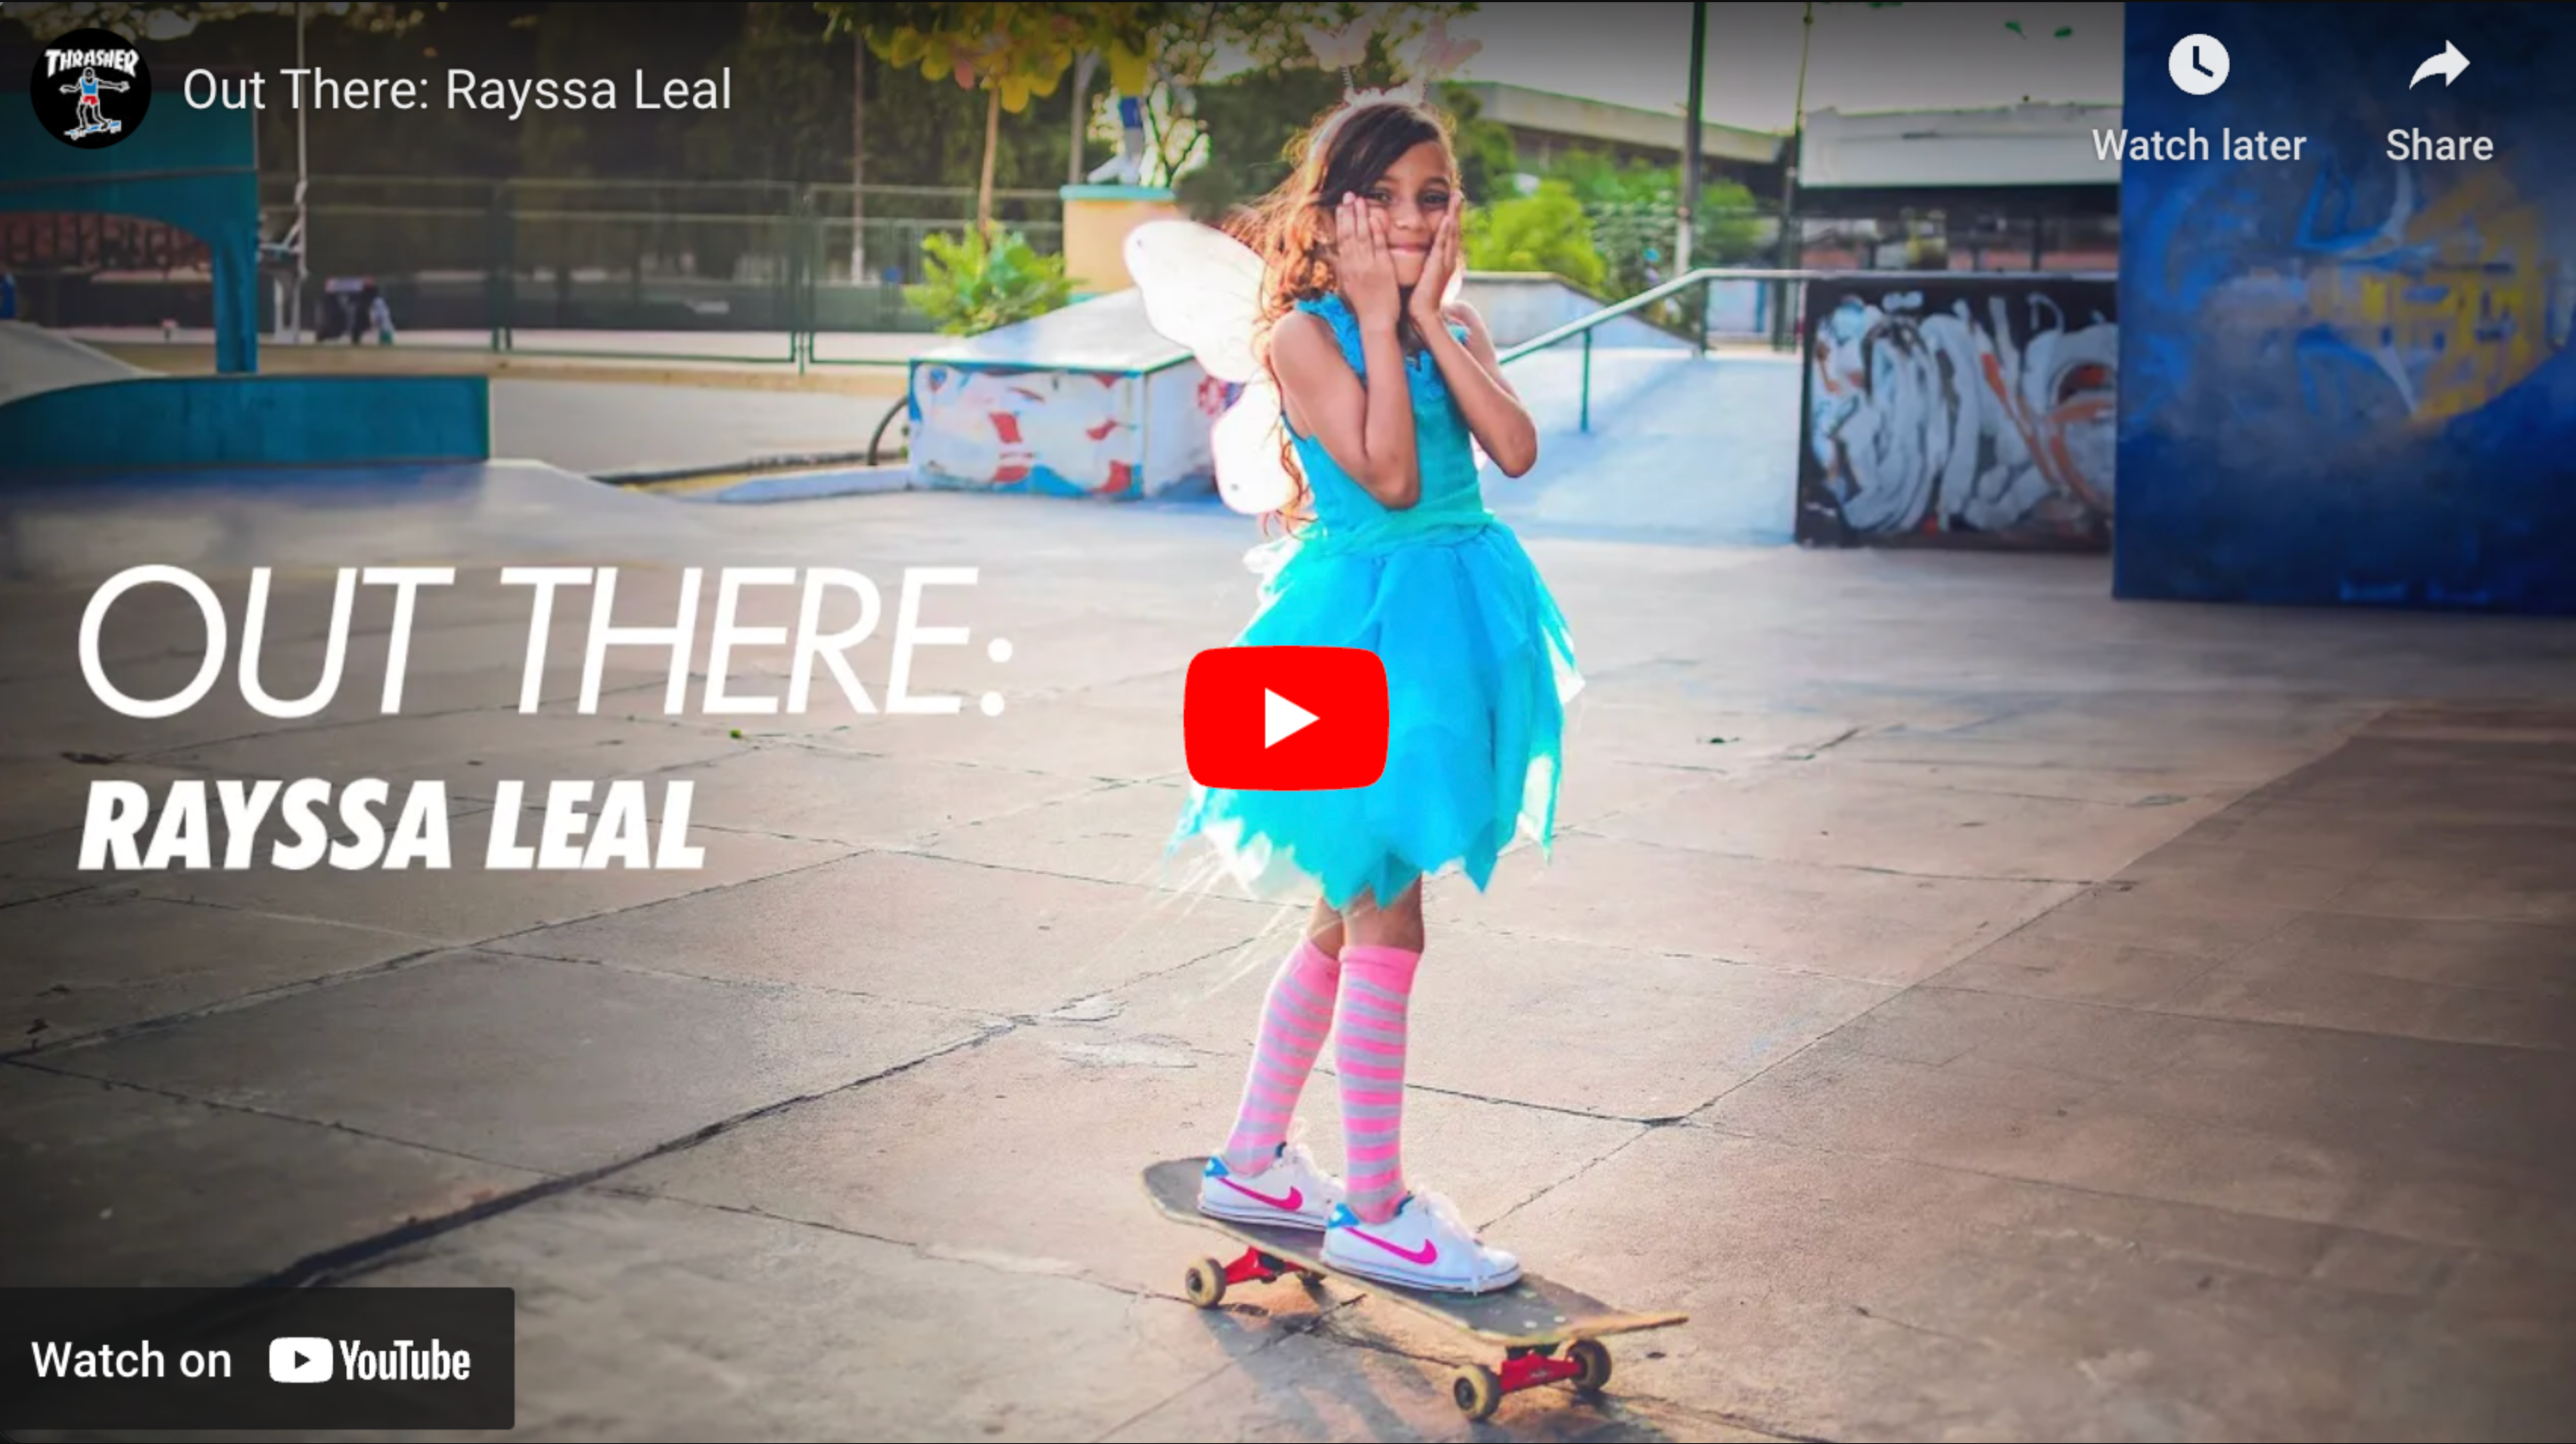 Out There: Rayssa Leal